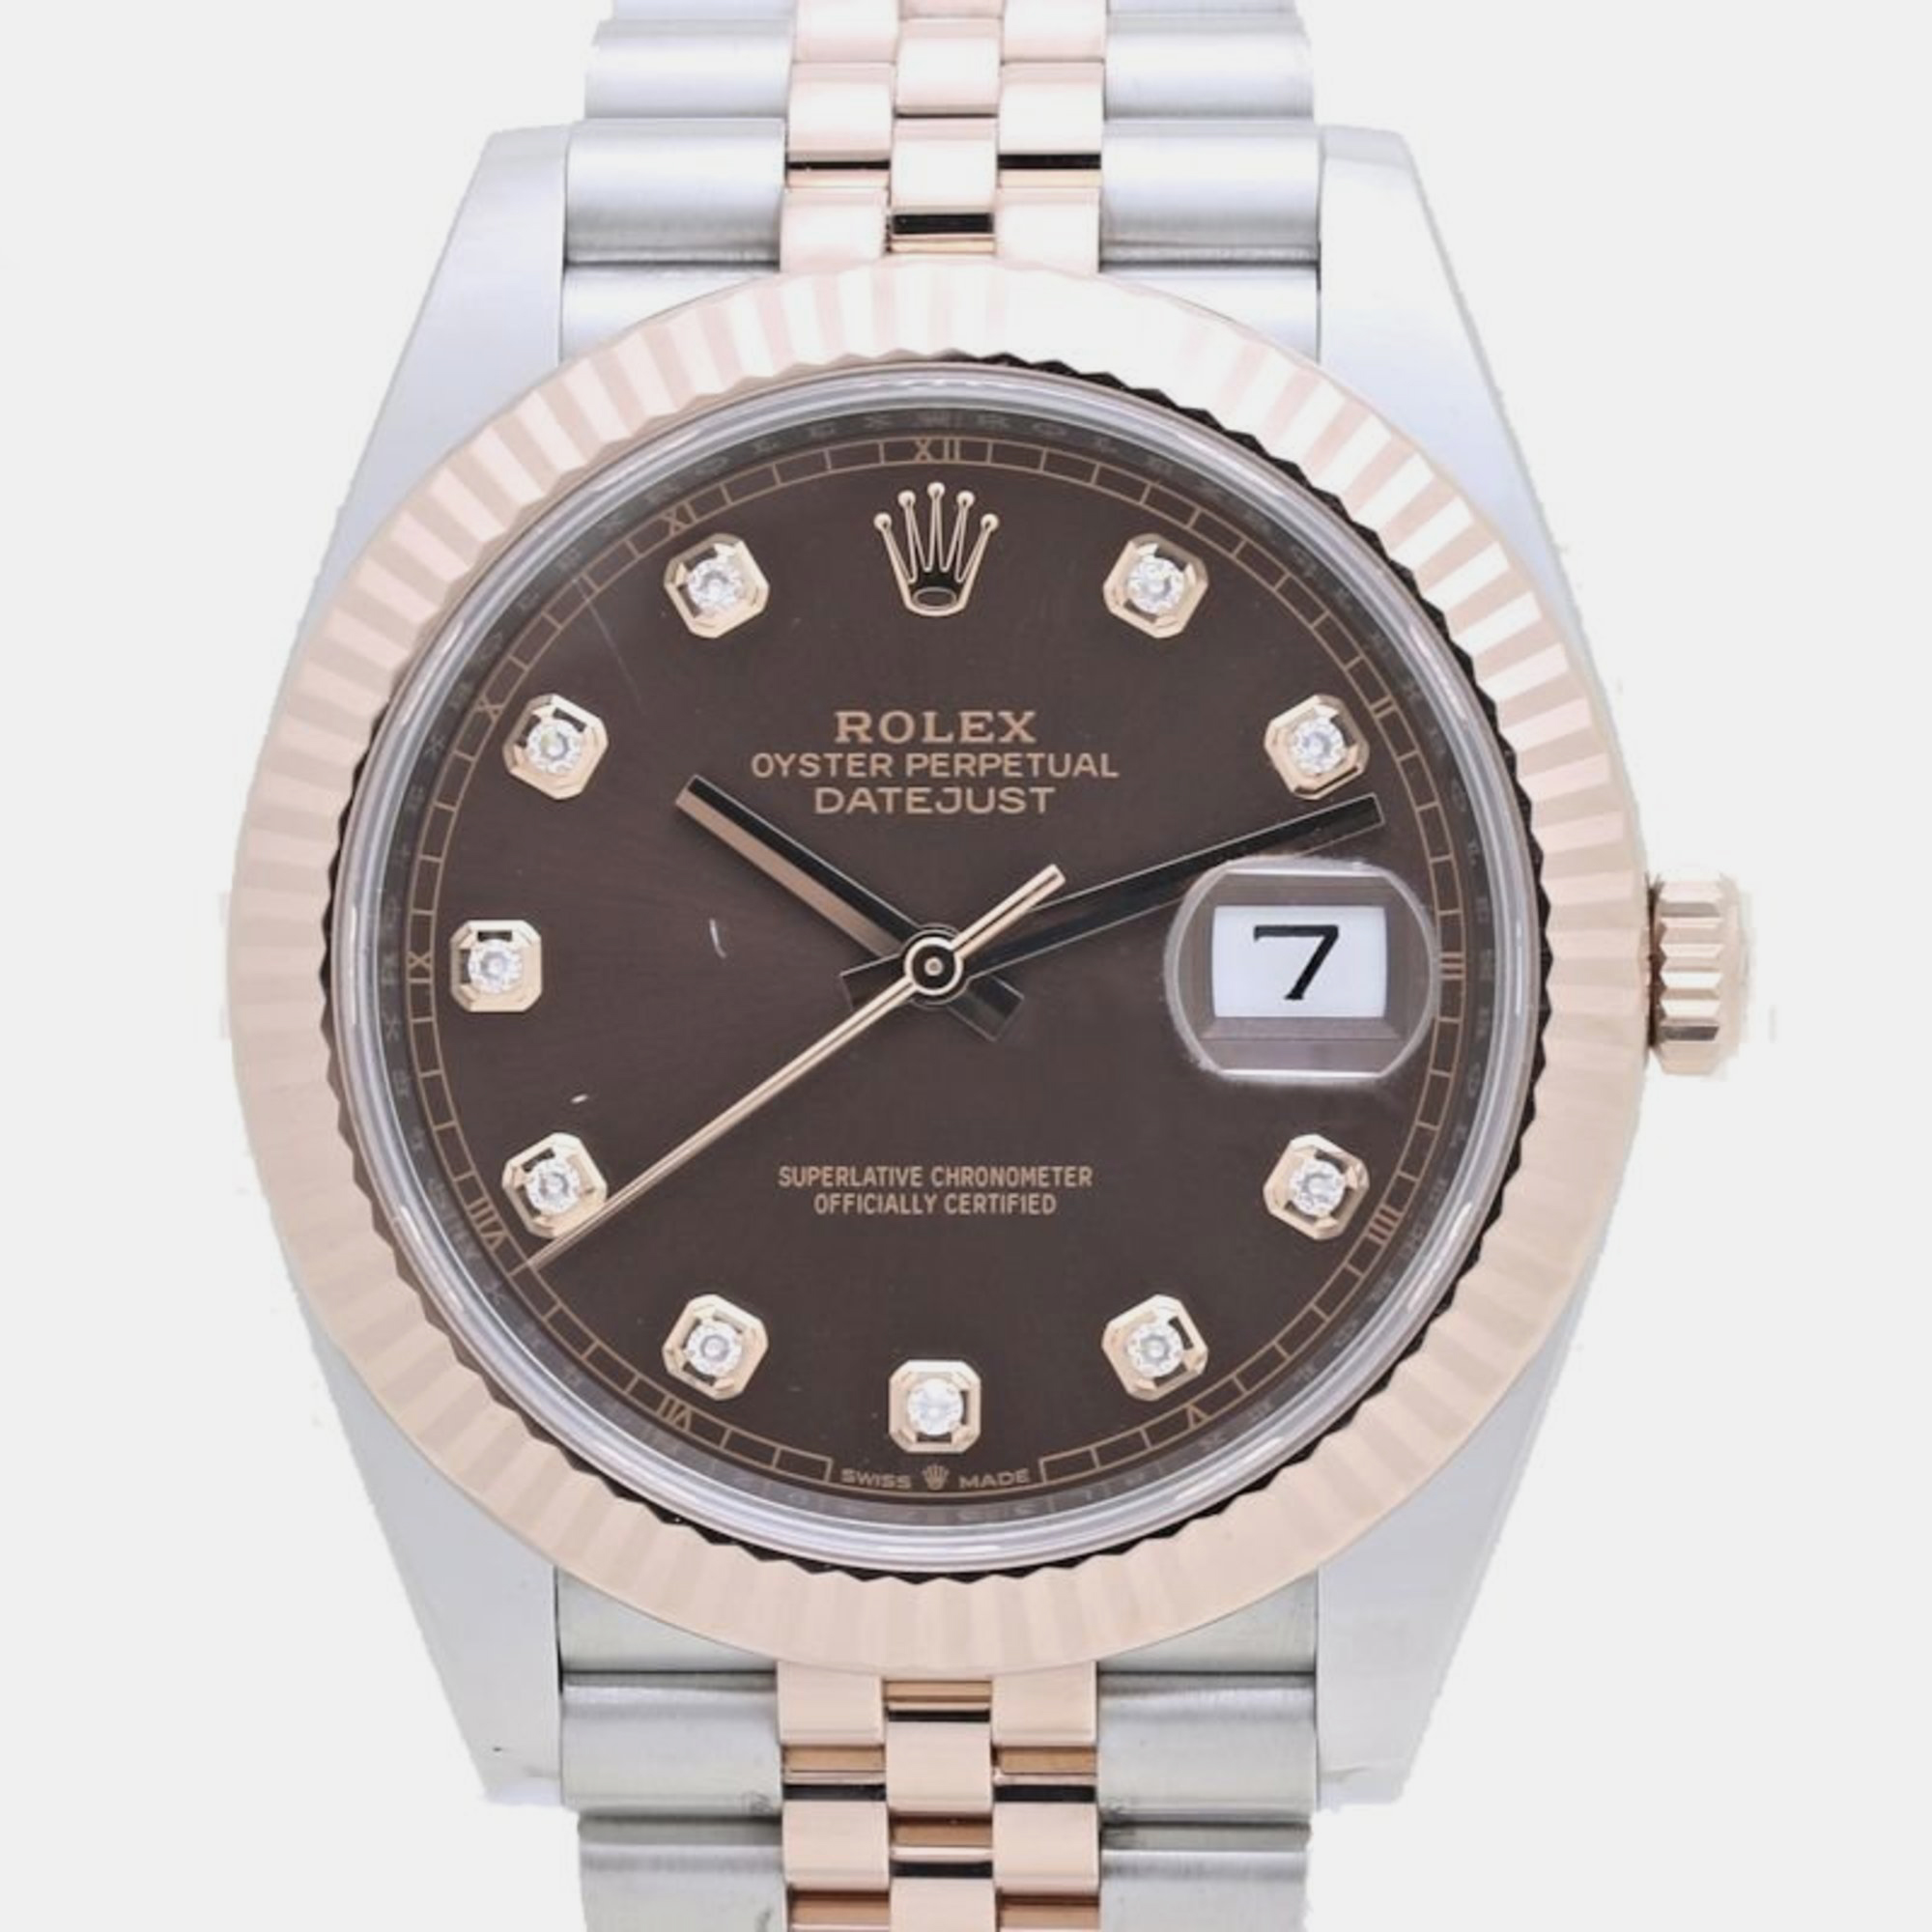 Rolex brown 18k rose gold stainless steel diamond datejust 126331 automatic men's wristwatch 41 mm